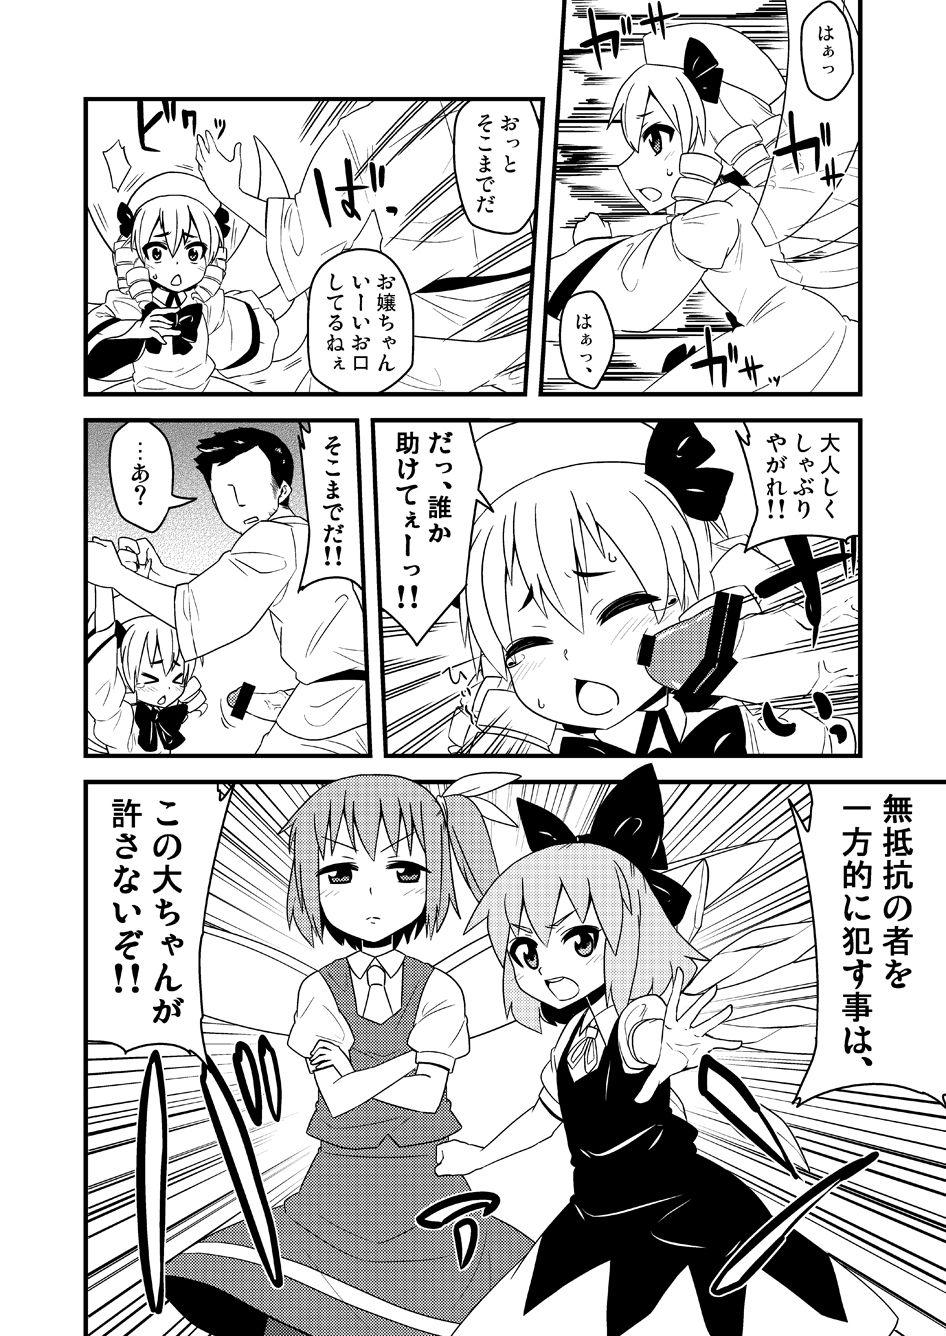 Dirty ギロちん☆大妖精 - Touhou project Russia - Page 3